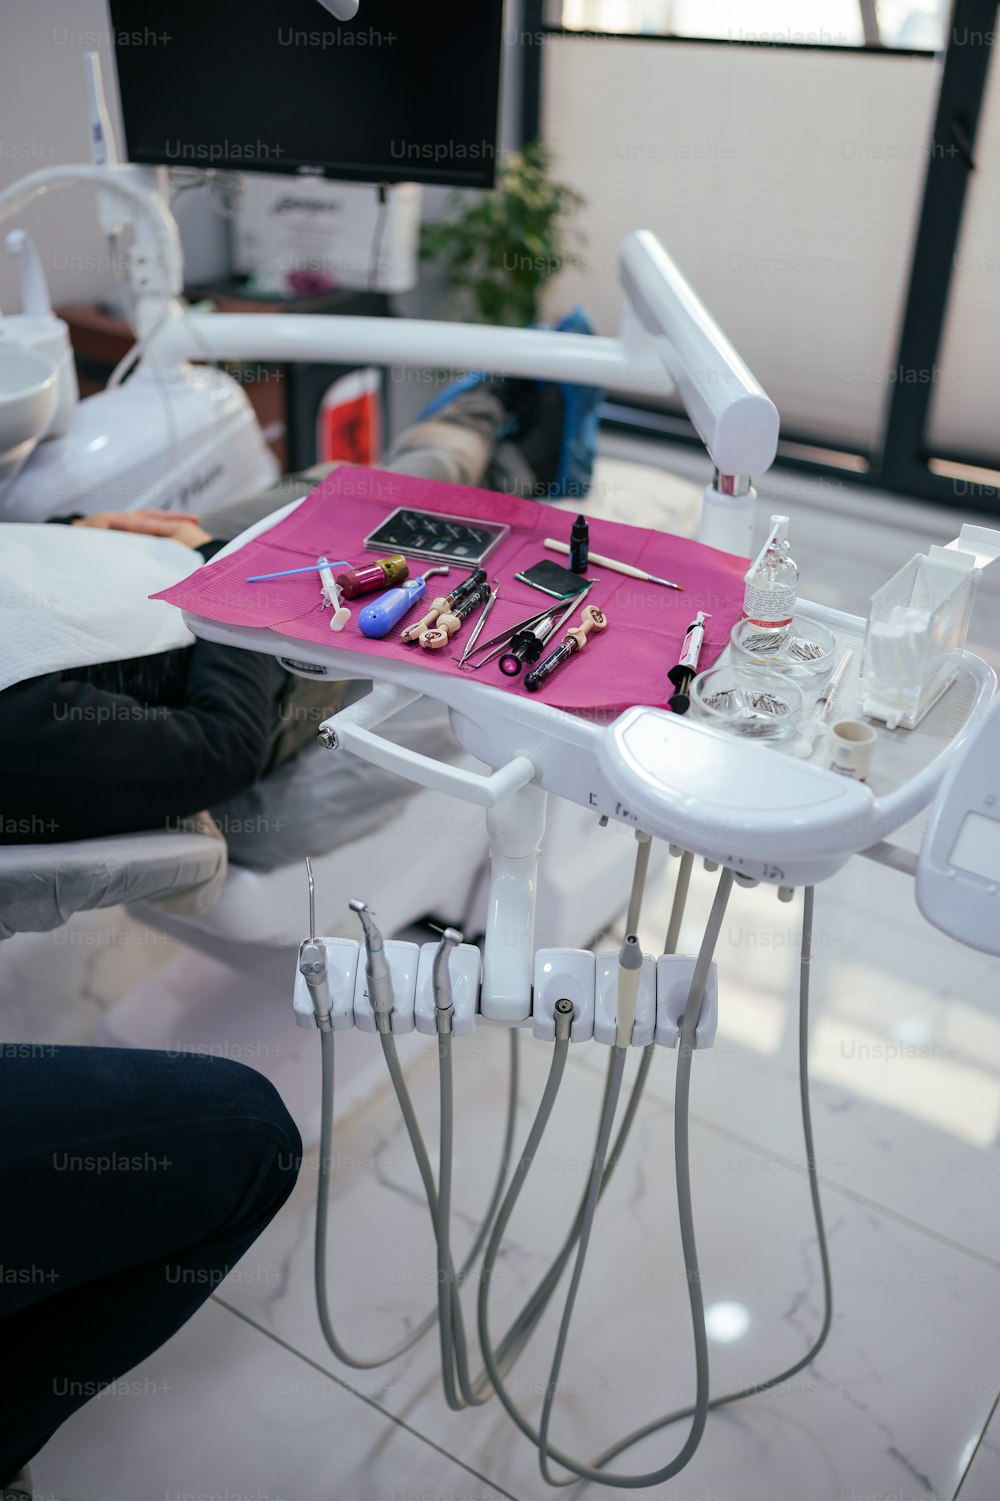 a dentist's chair with a tray of tools on it